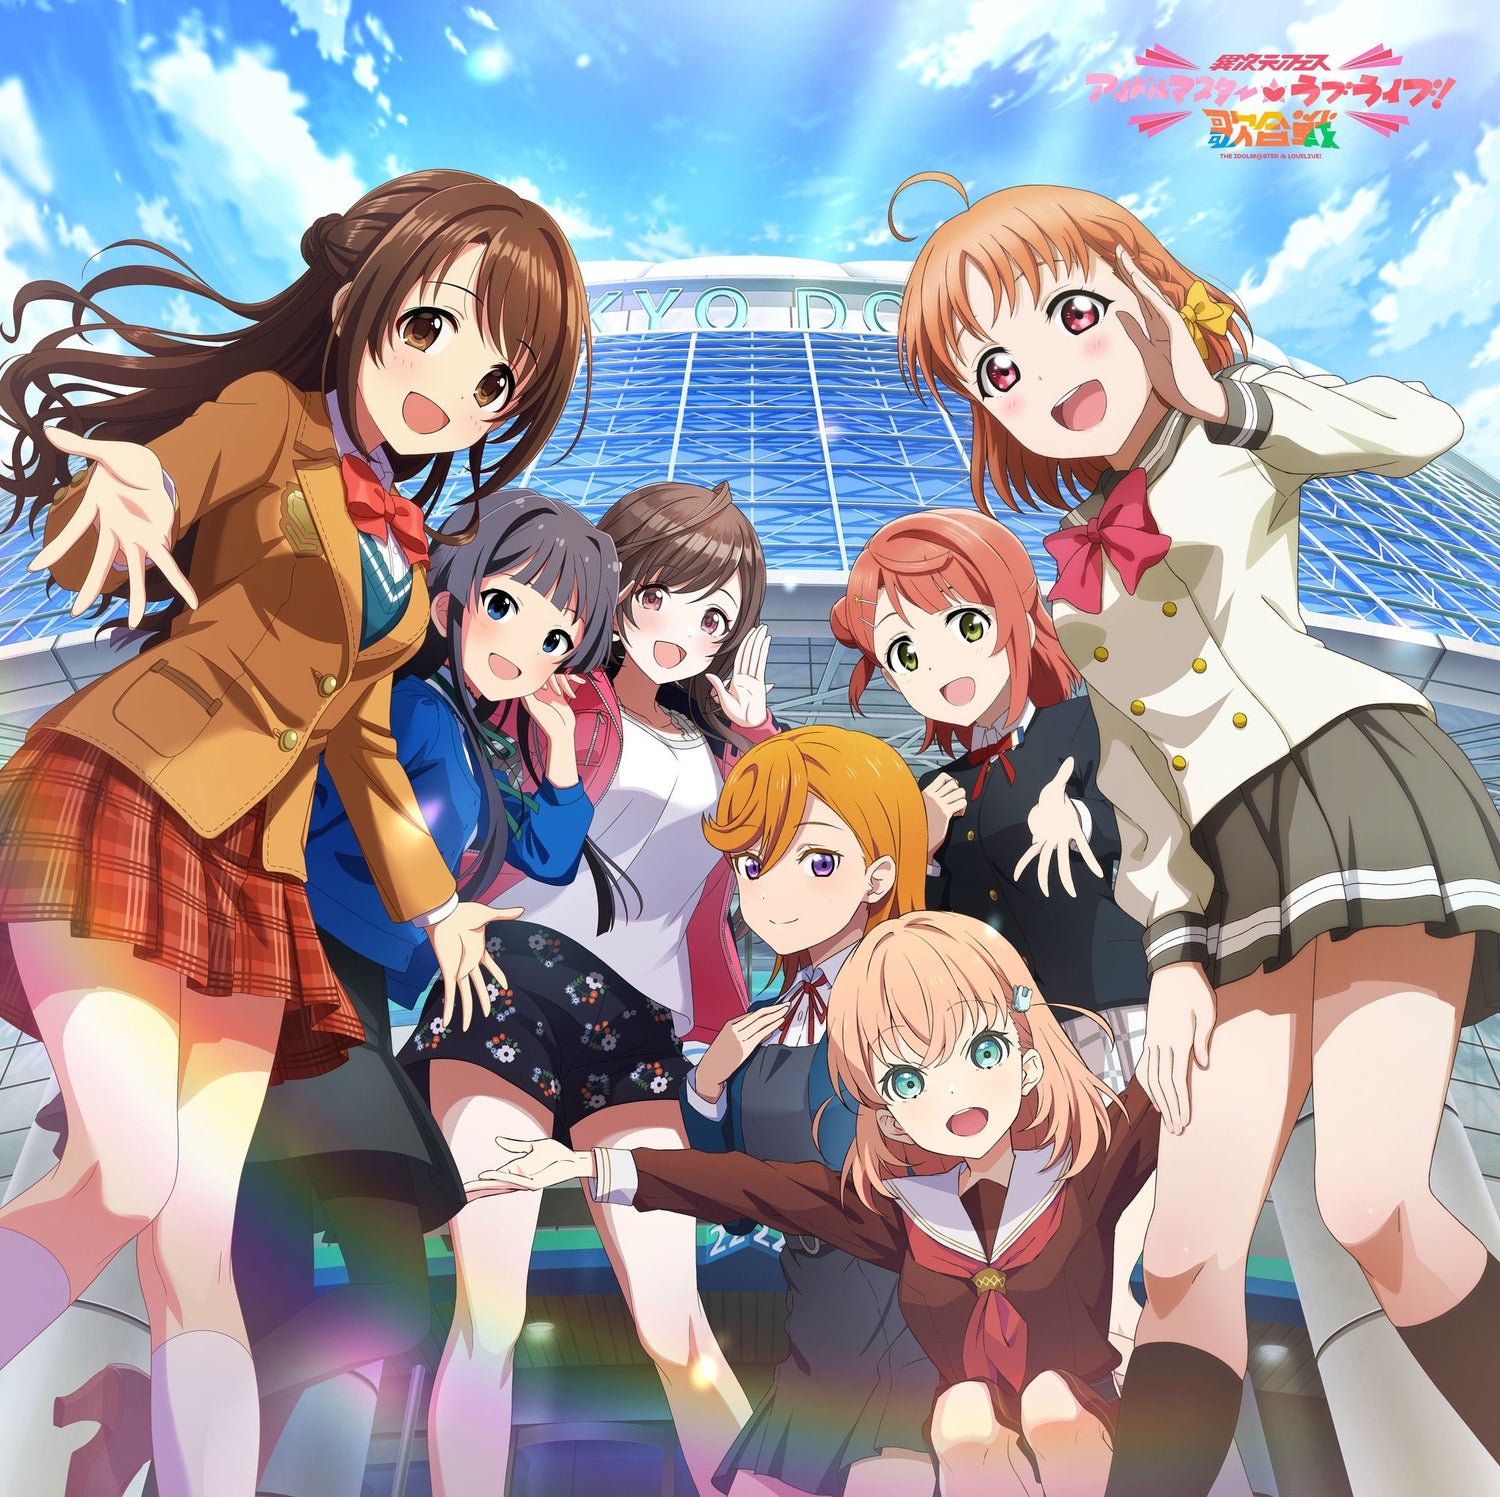 The IDOLM@STER